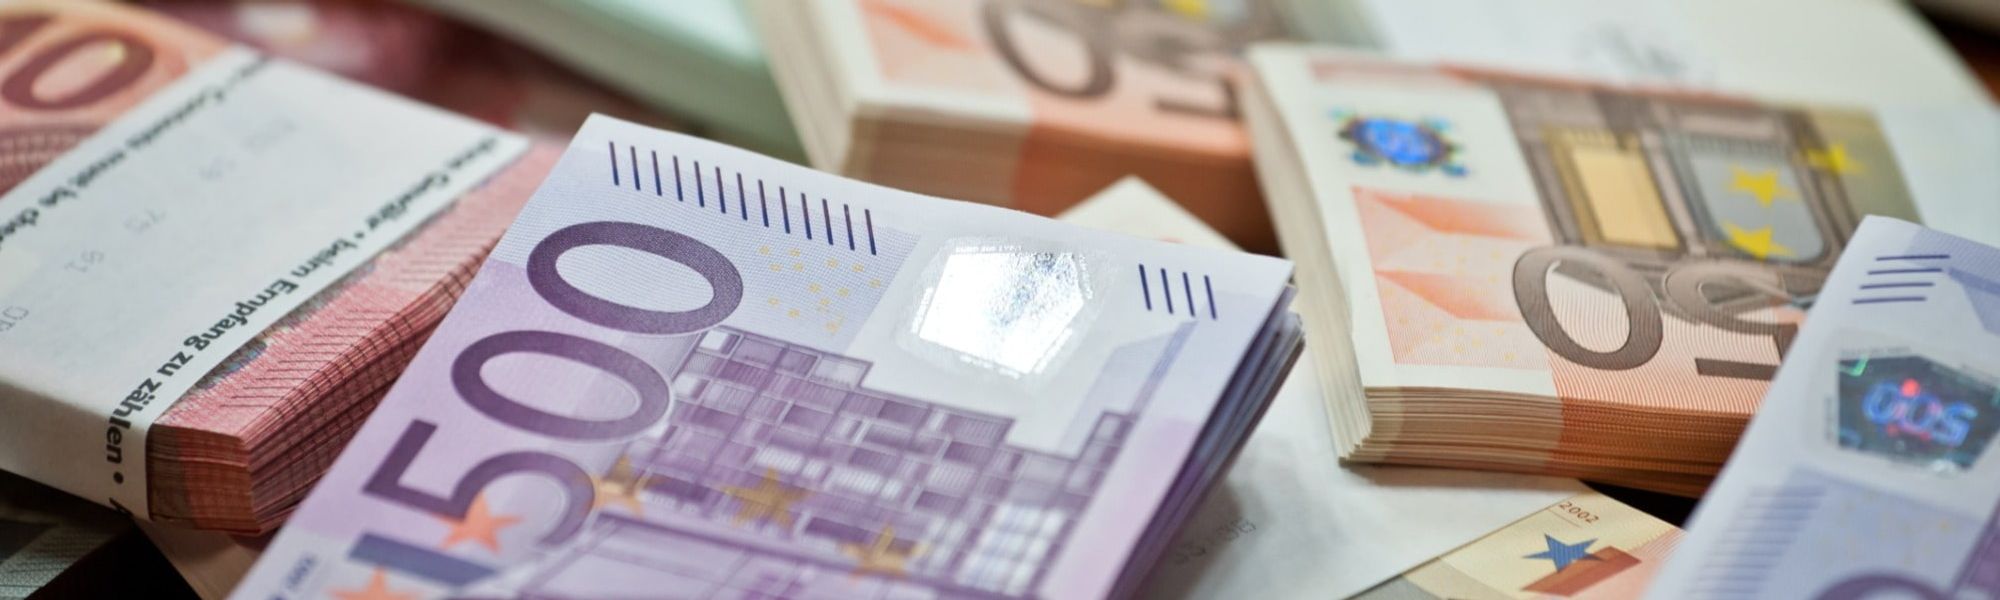 euro notes stacked, typical salaries wages in Ireland Europe